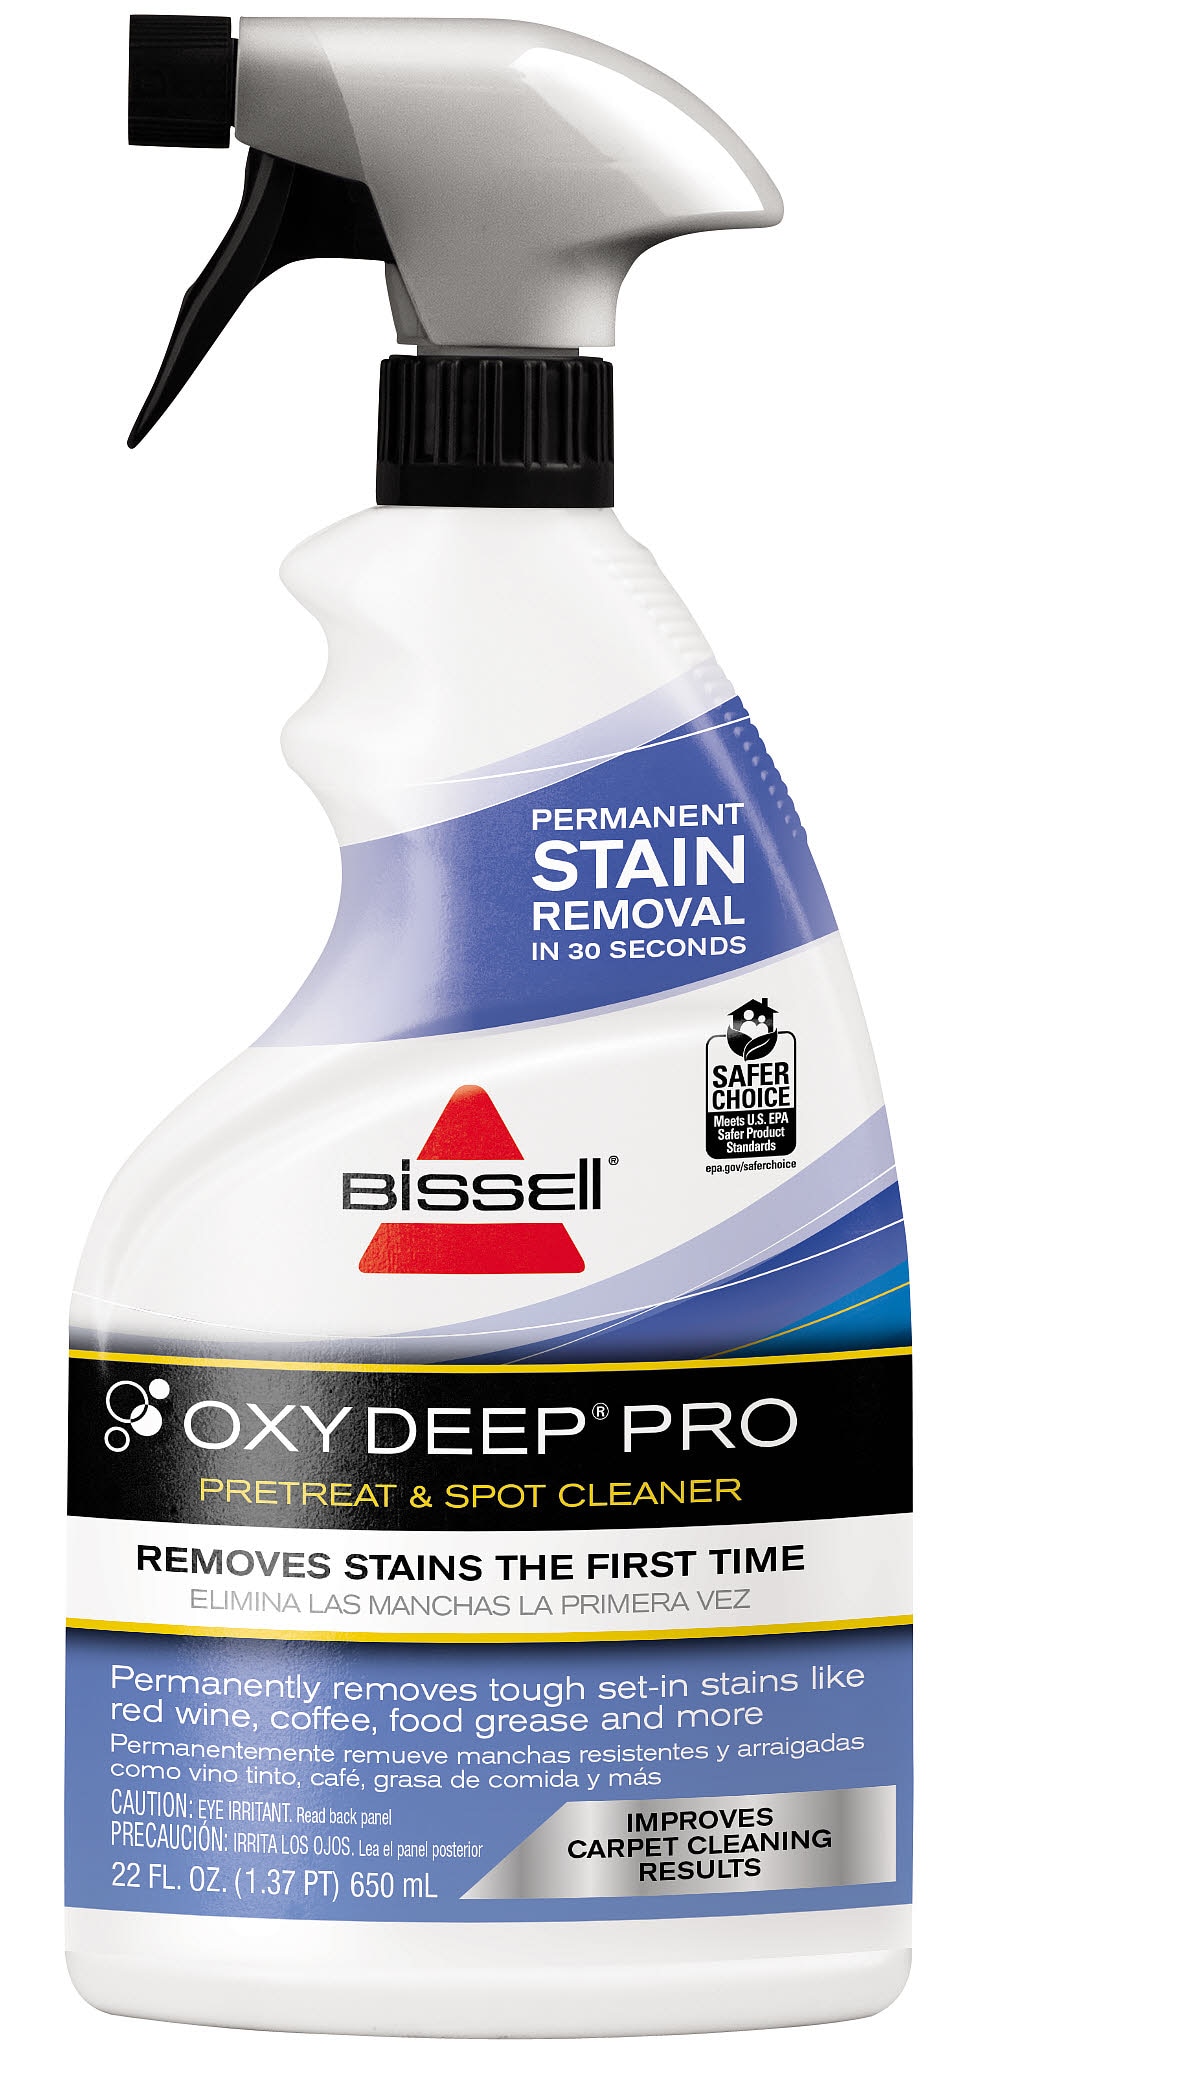 Carpet Stain Removers in Carpet Cleaning Solution 